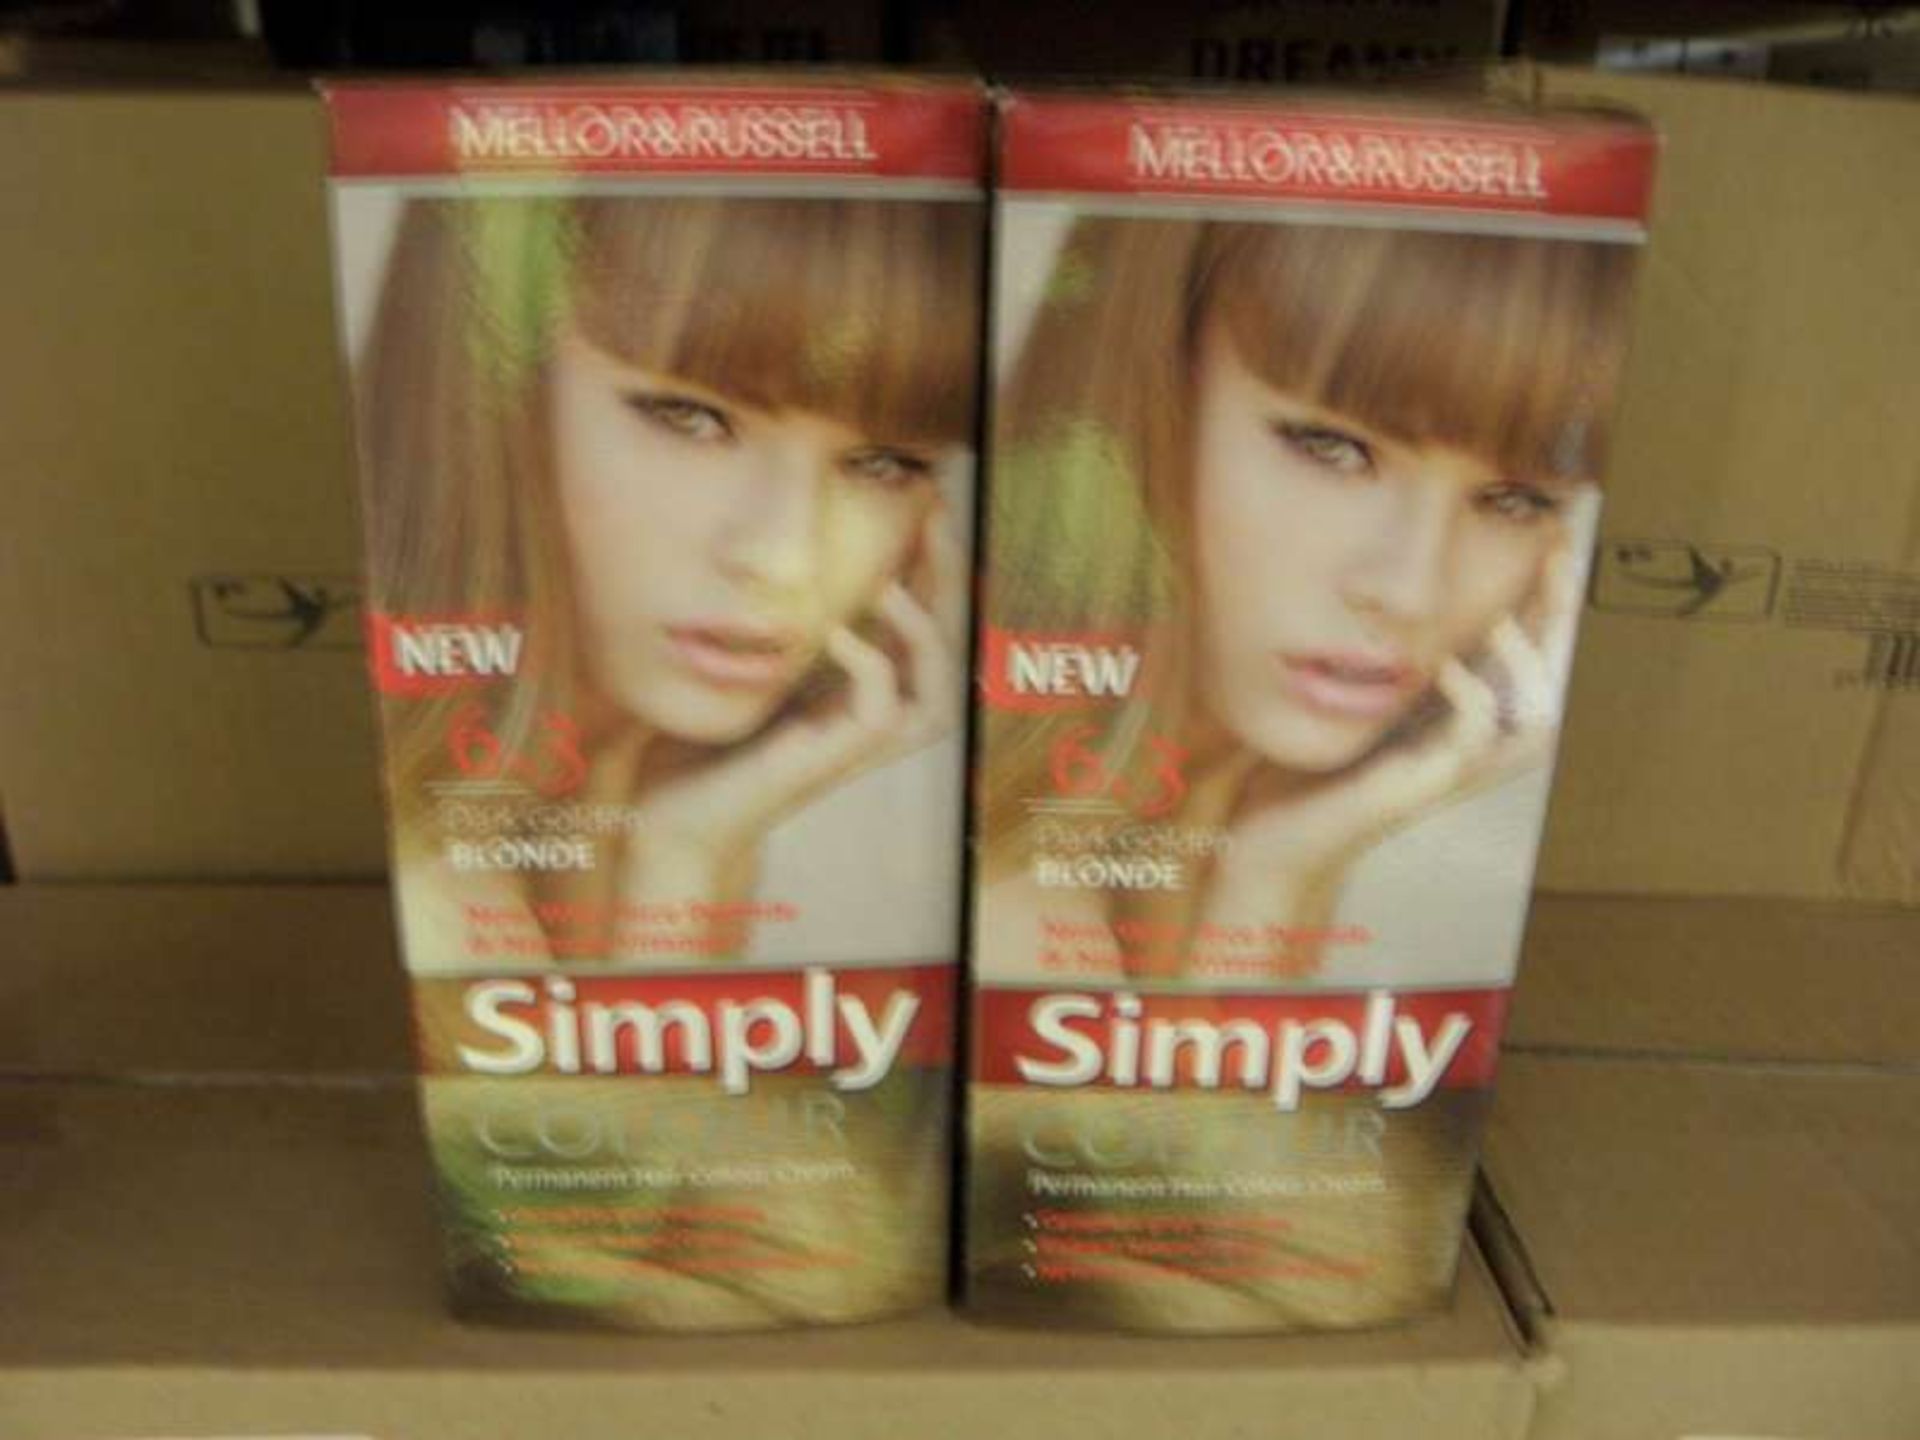 204 X MELLOR AND RUSSELL DARK GOLDEN BLONDE SENSATION PERMANENT HAIR COLOUR CREAM IN 17 BOXES